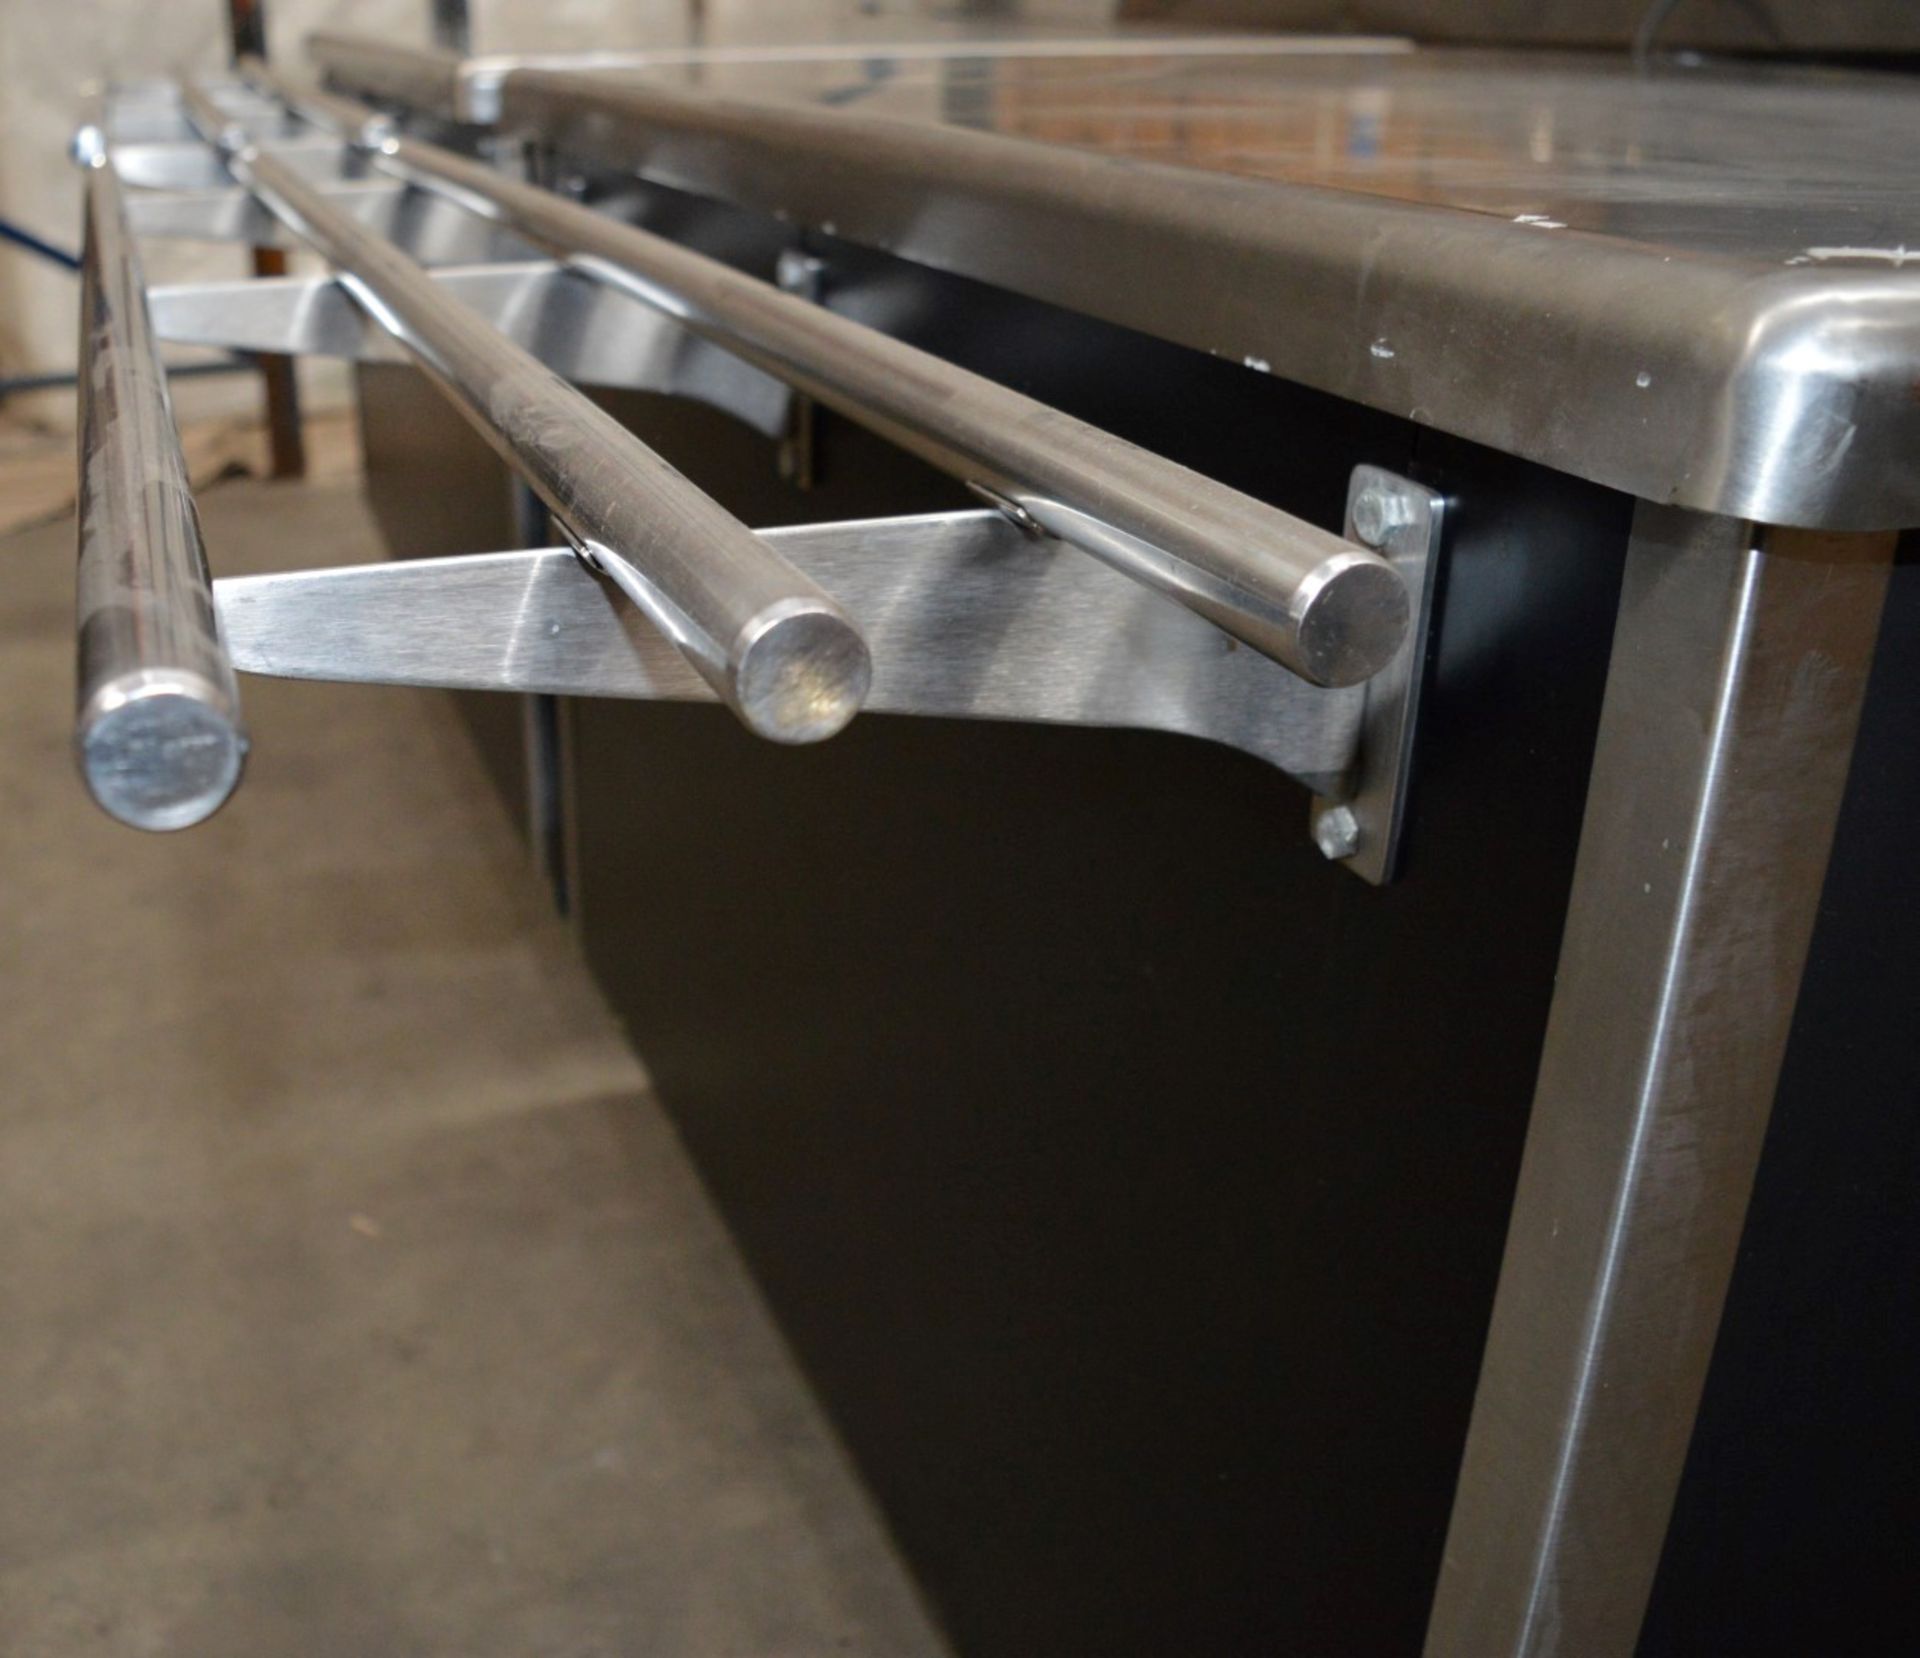 2 x Serving Counters - On Castors For Maneuverability - Ideal For Pub Carvery, Canteens, All You Can - Image 4 of 7